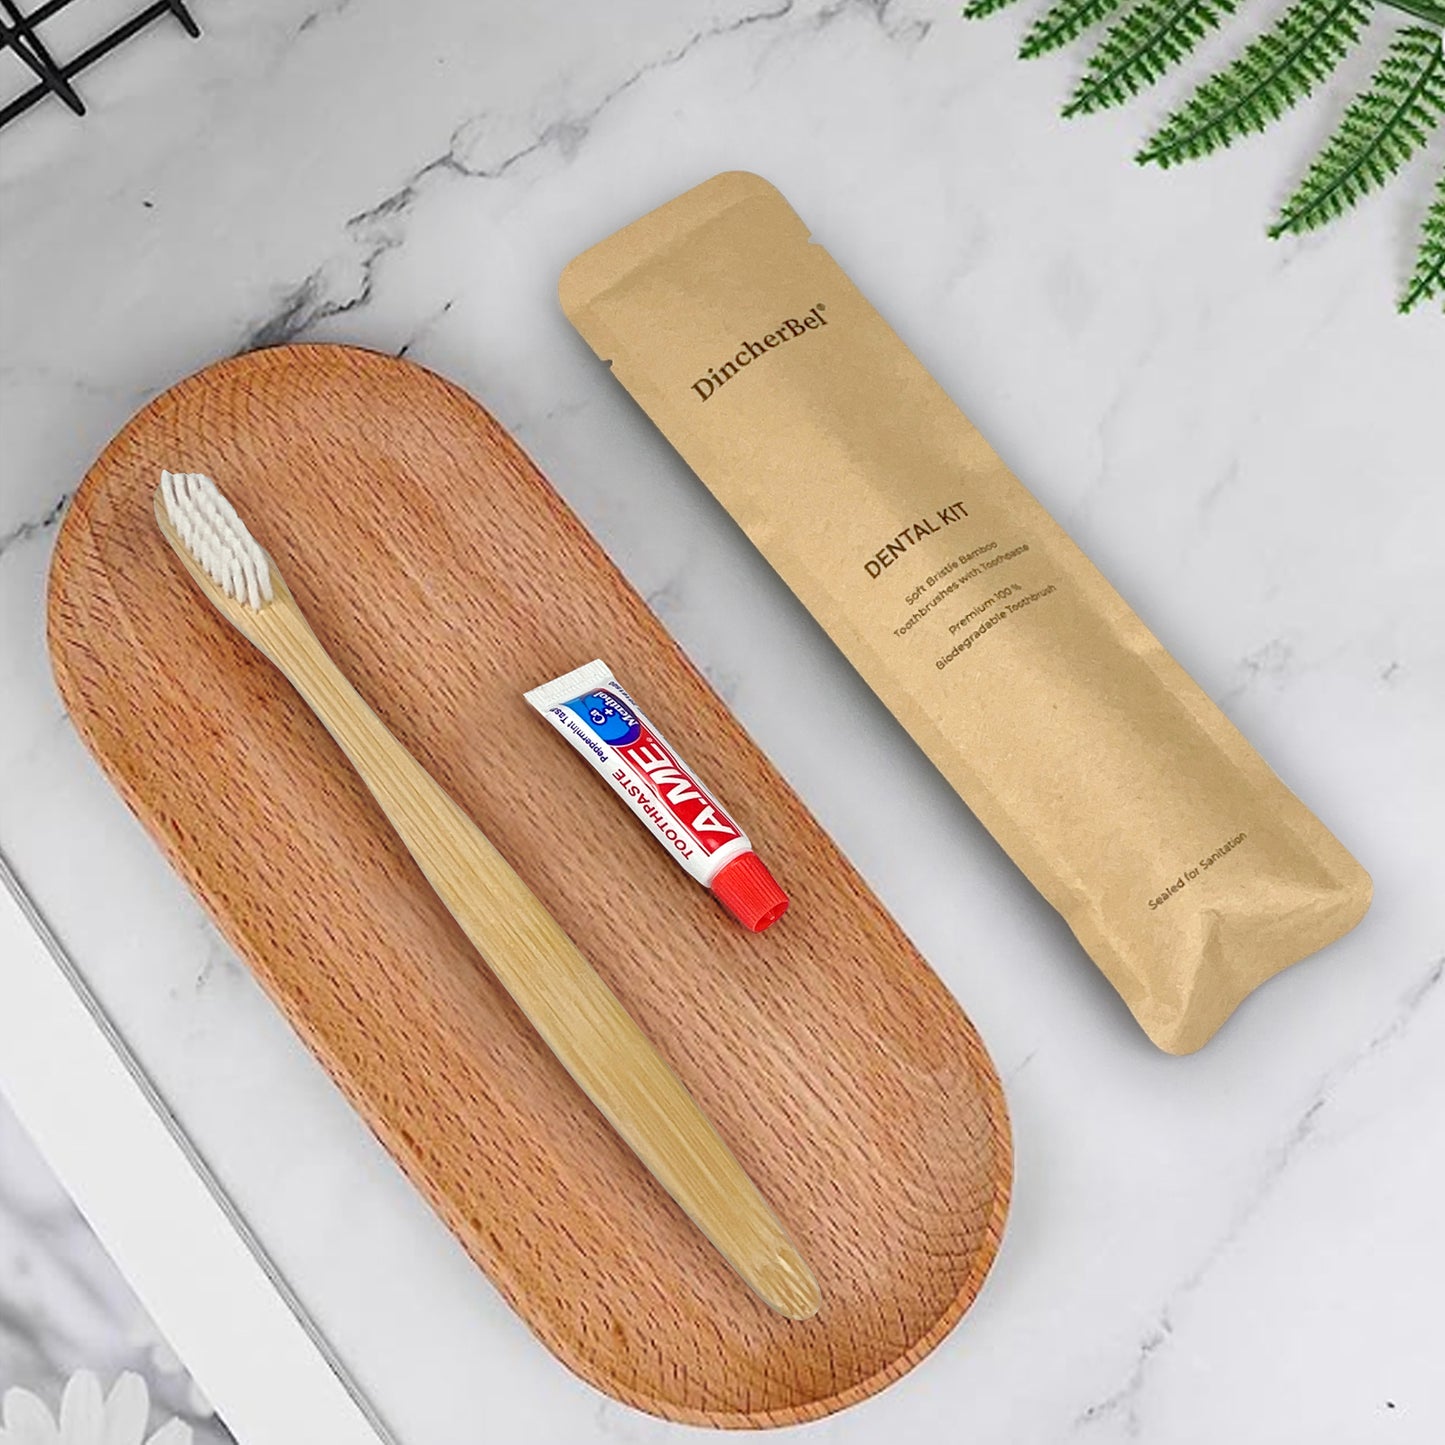 Disposable Bamboo Toothbrushes with Toothpaste(6g) | BPA Free Soft Bristles | Eco-Friendly | Individually Sealed & Biodegradable Bamboo Toothbrushes